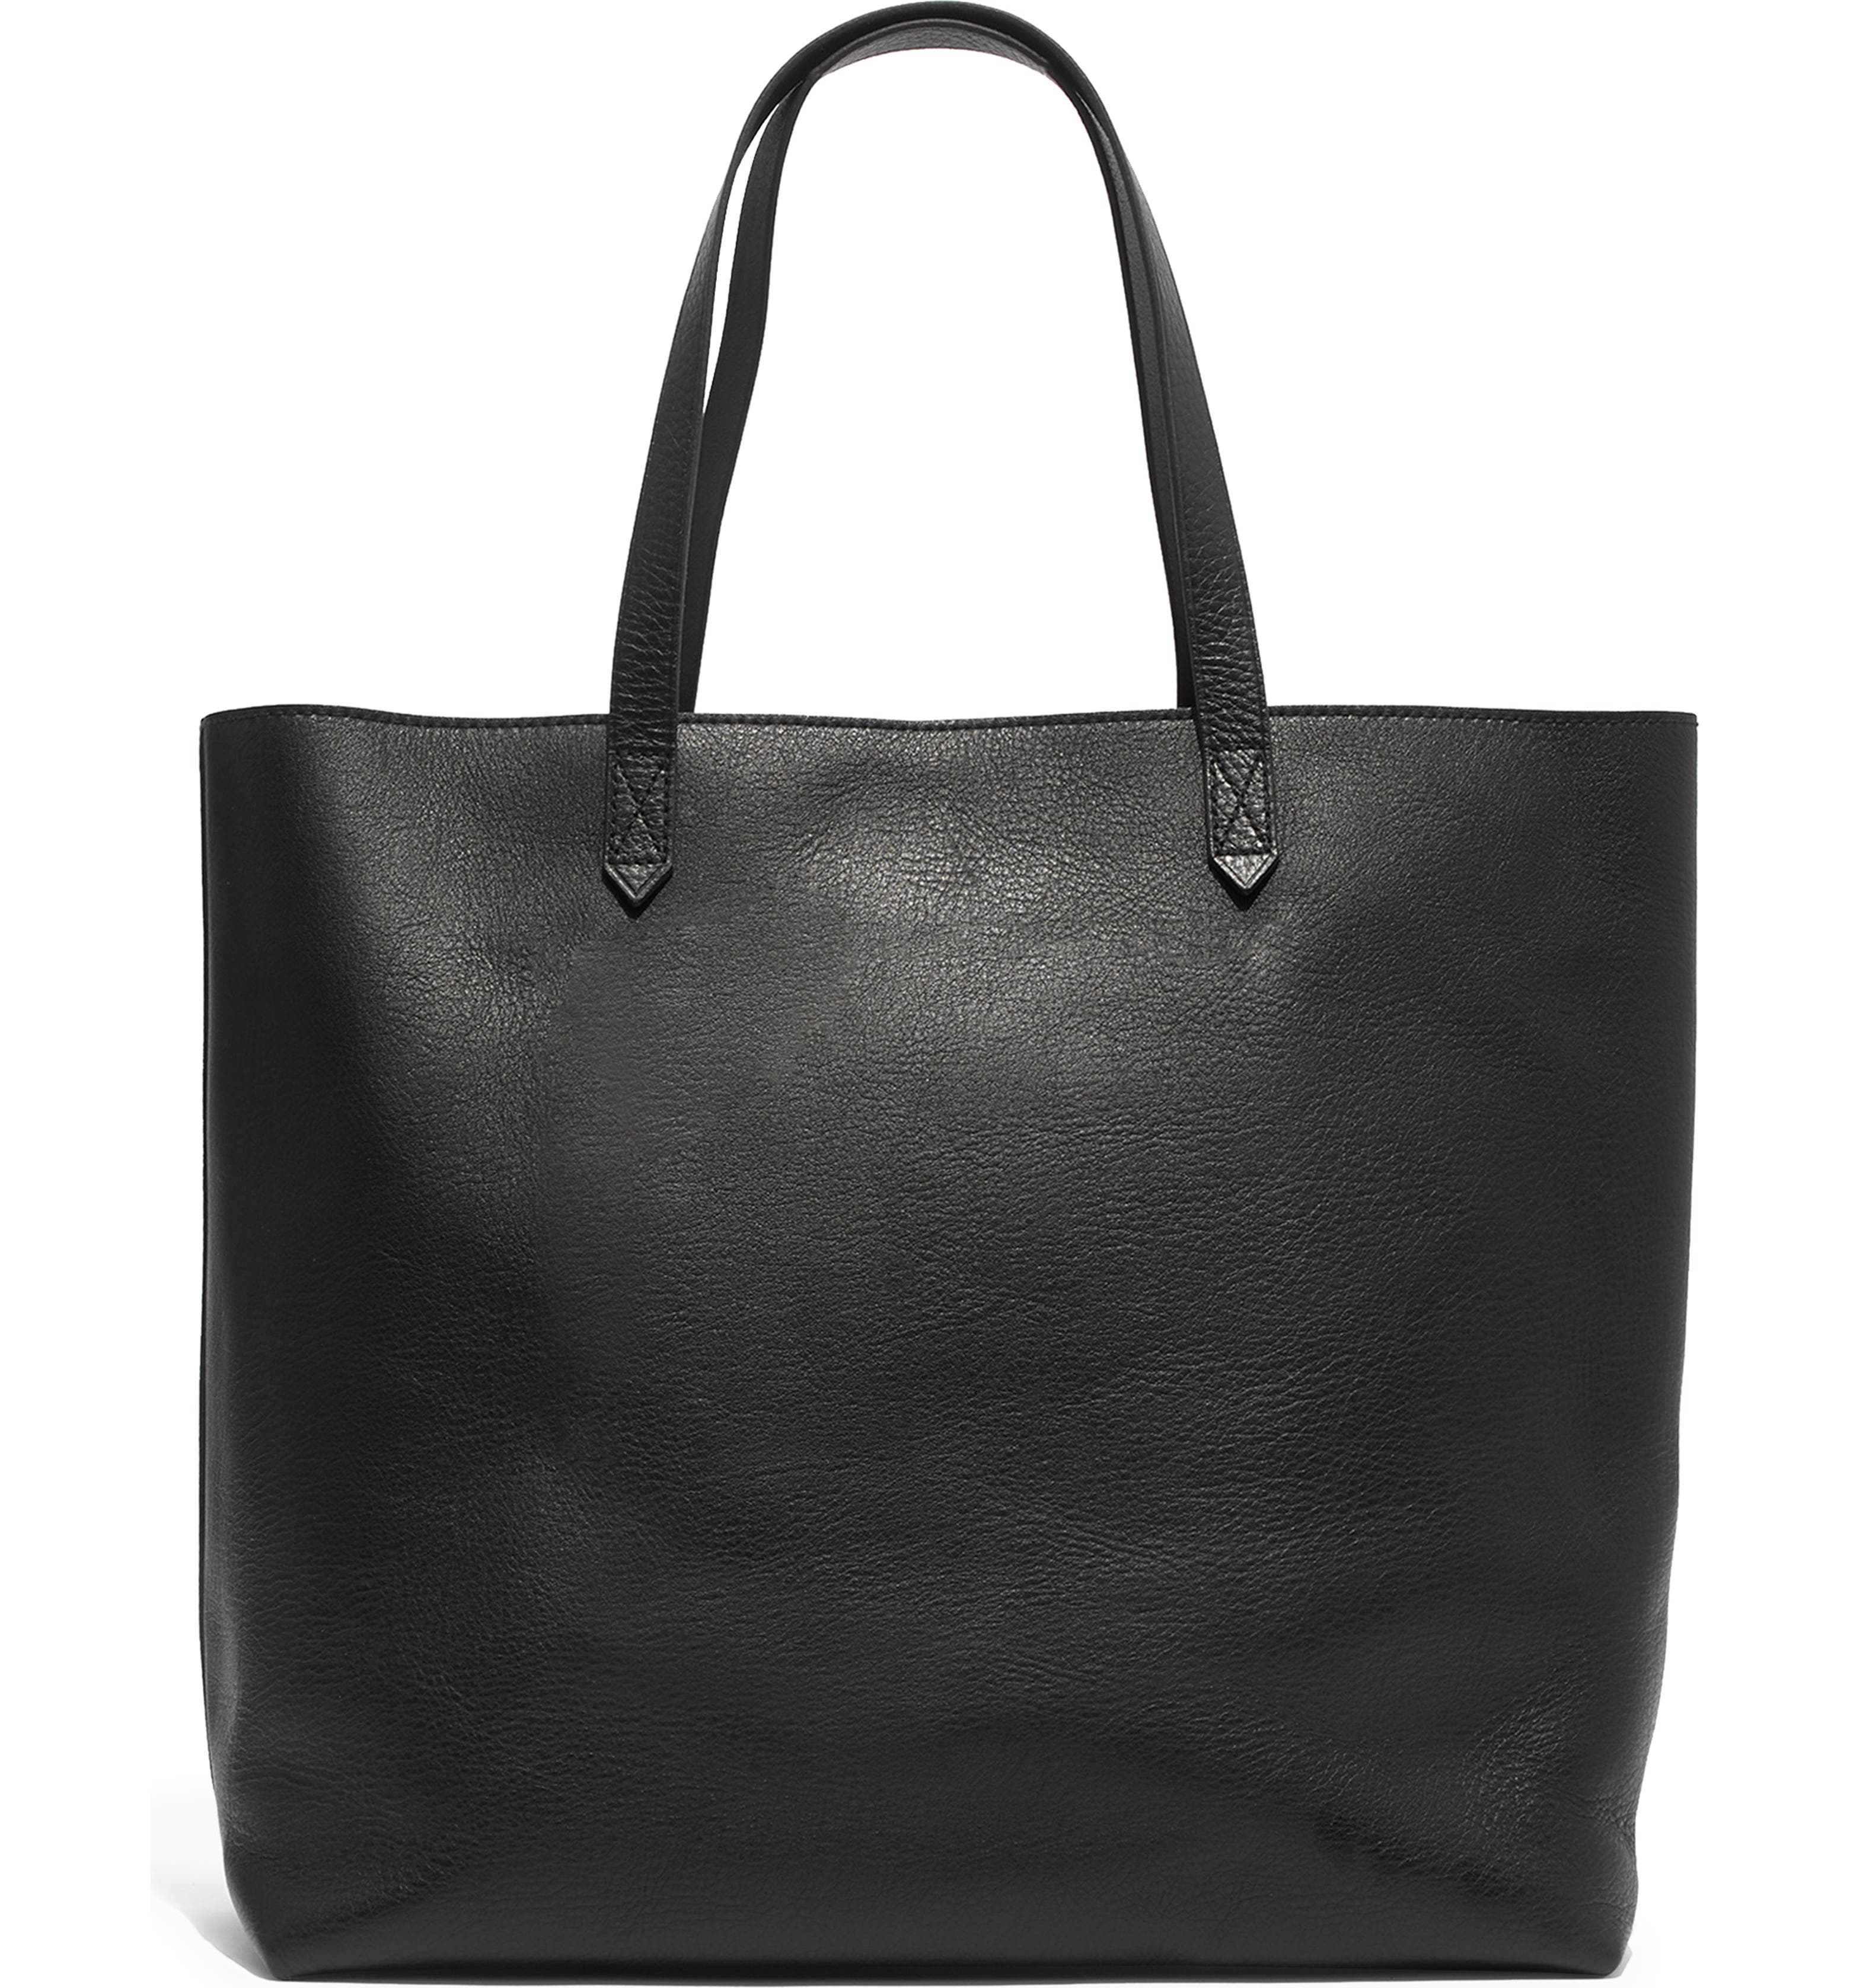 Madewell Zip Top Transport Leather Tote | Nordstrom